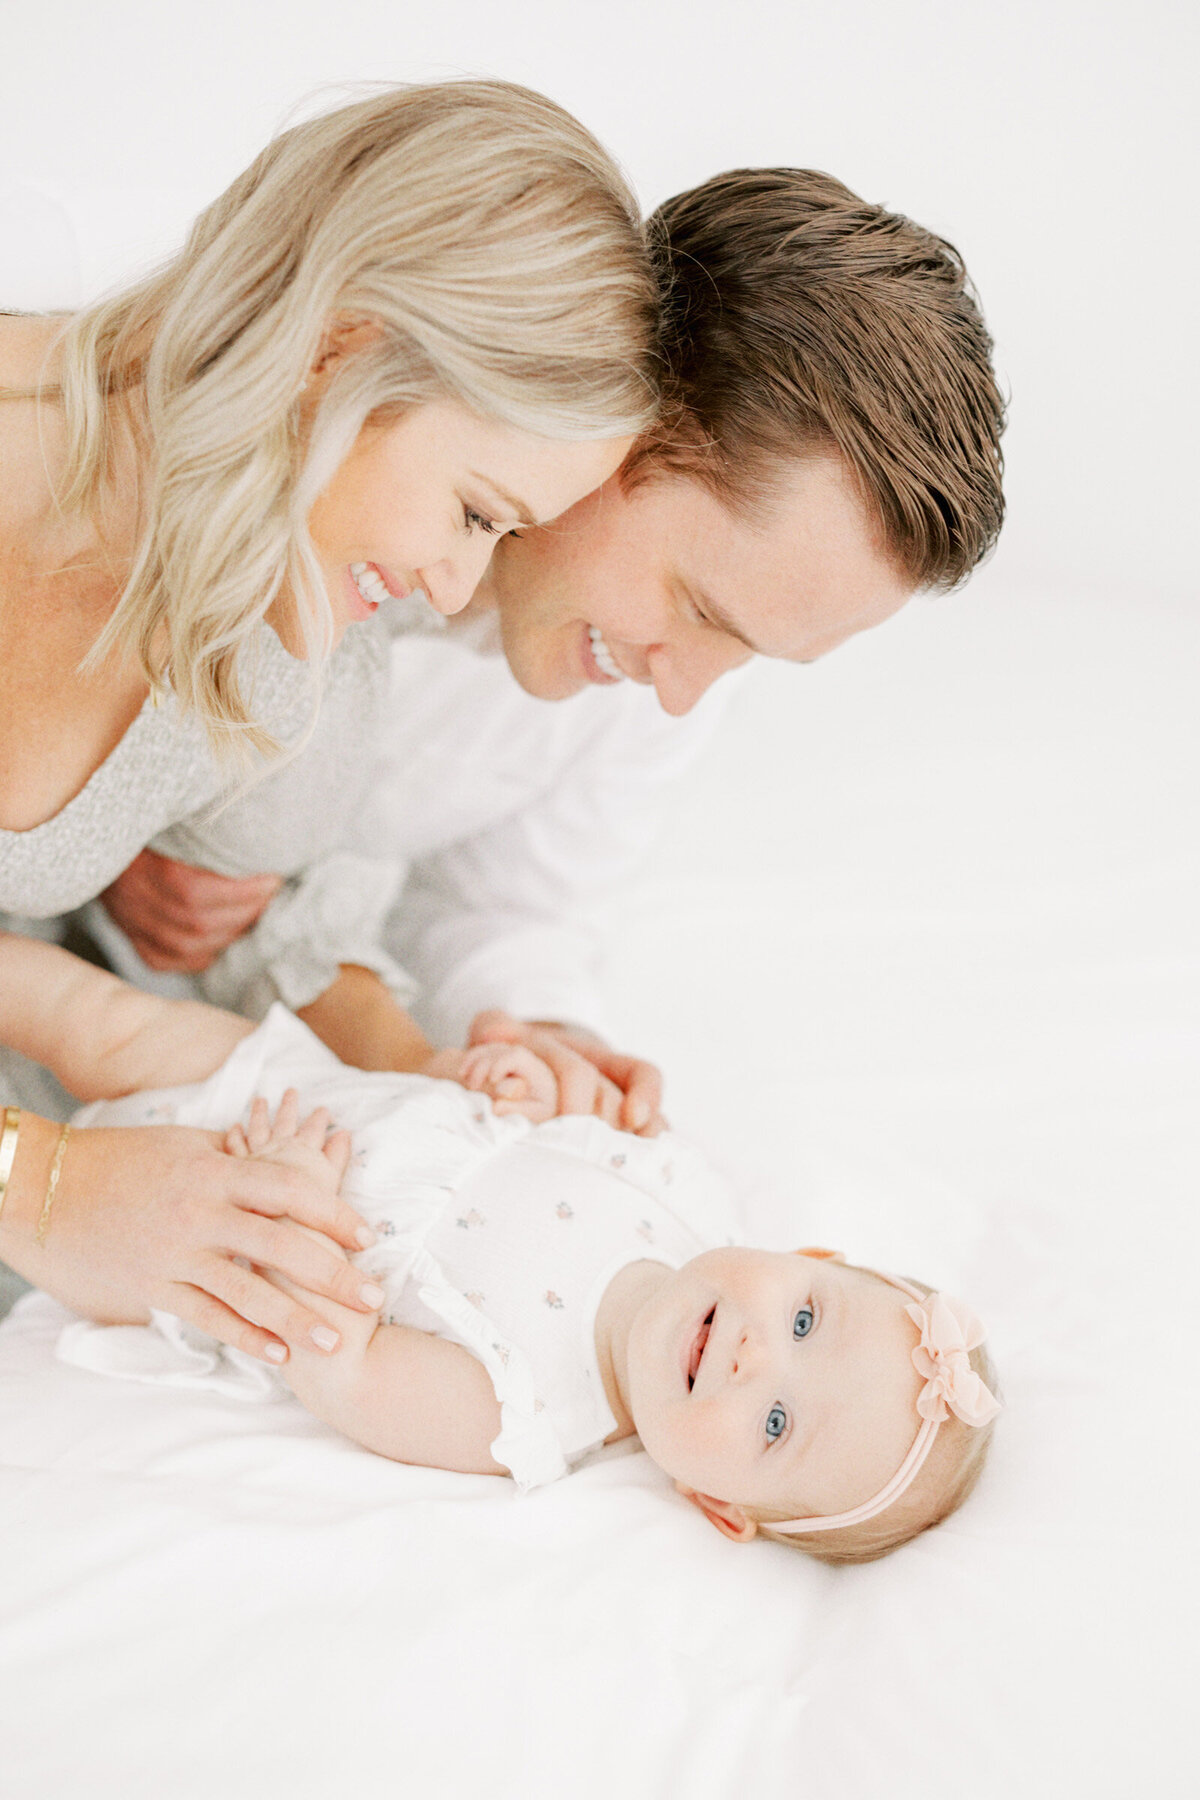 Baby and Family Photographer in Cleveland Ohio